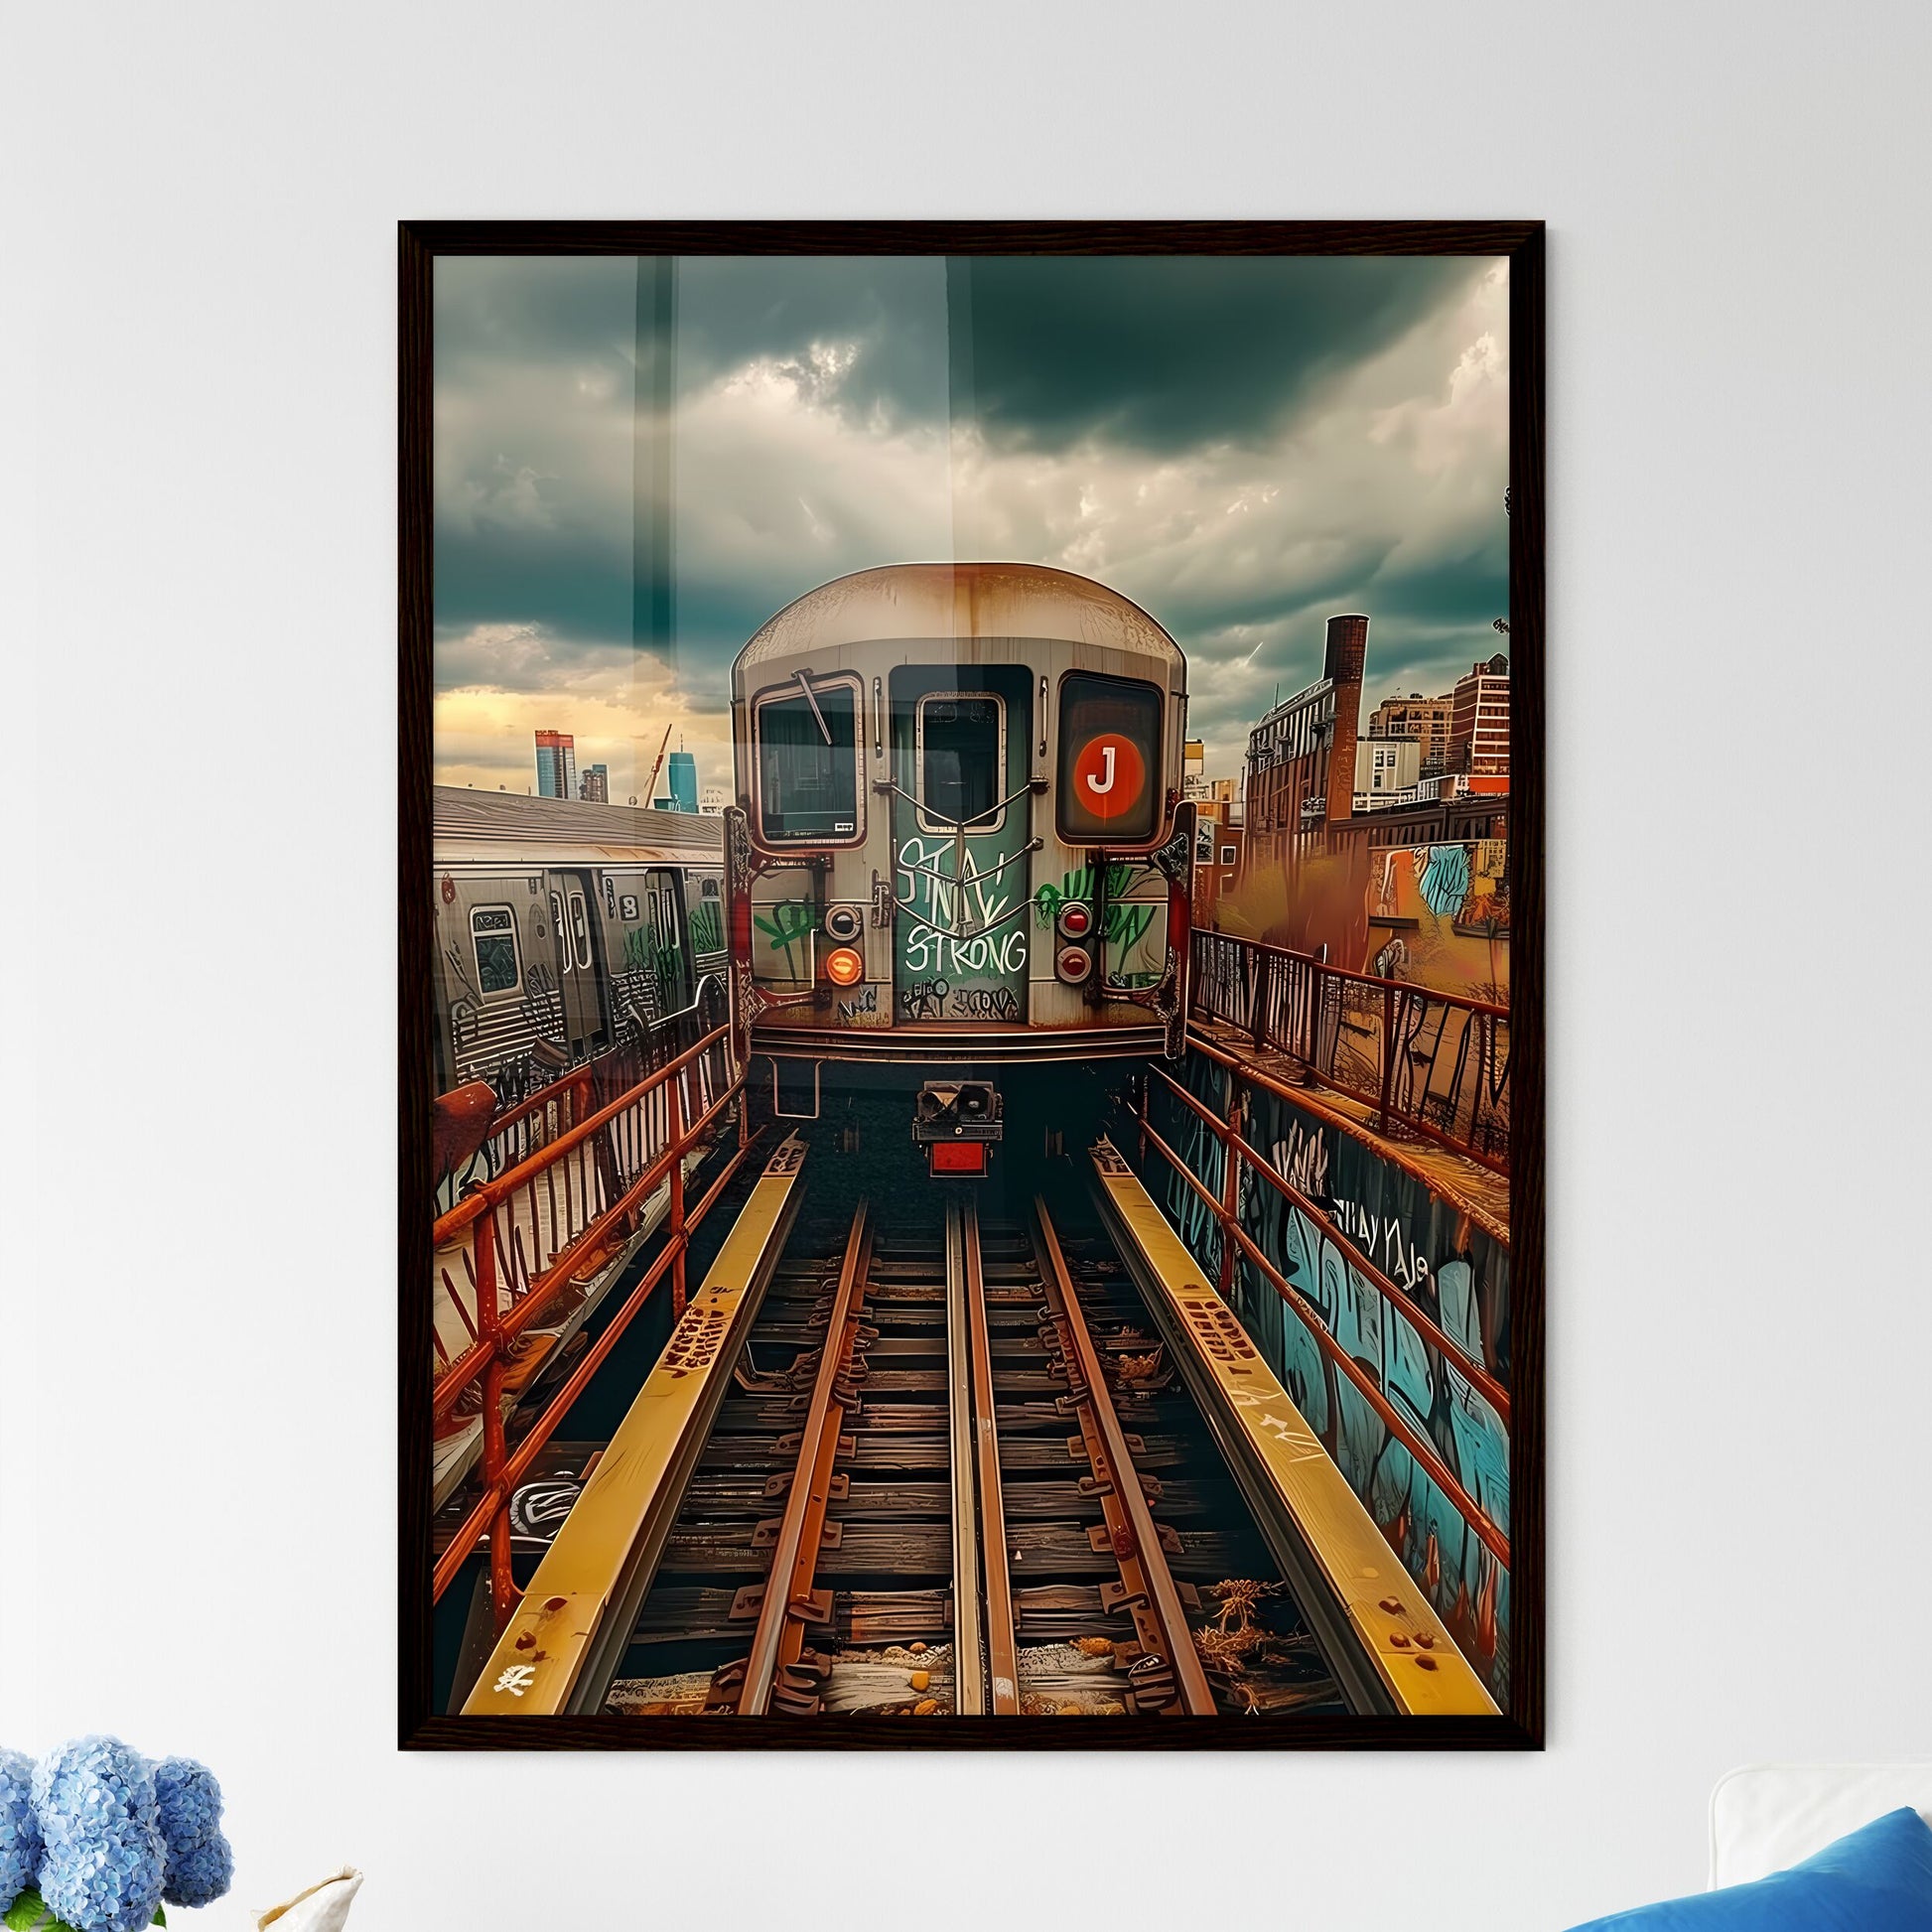 A new york train with the words spray painted STAY STRONG on it in eletric lime green, vintage poster design - Art print of a train on a bridge Default Title